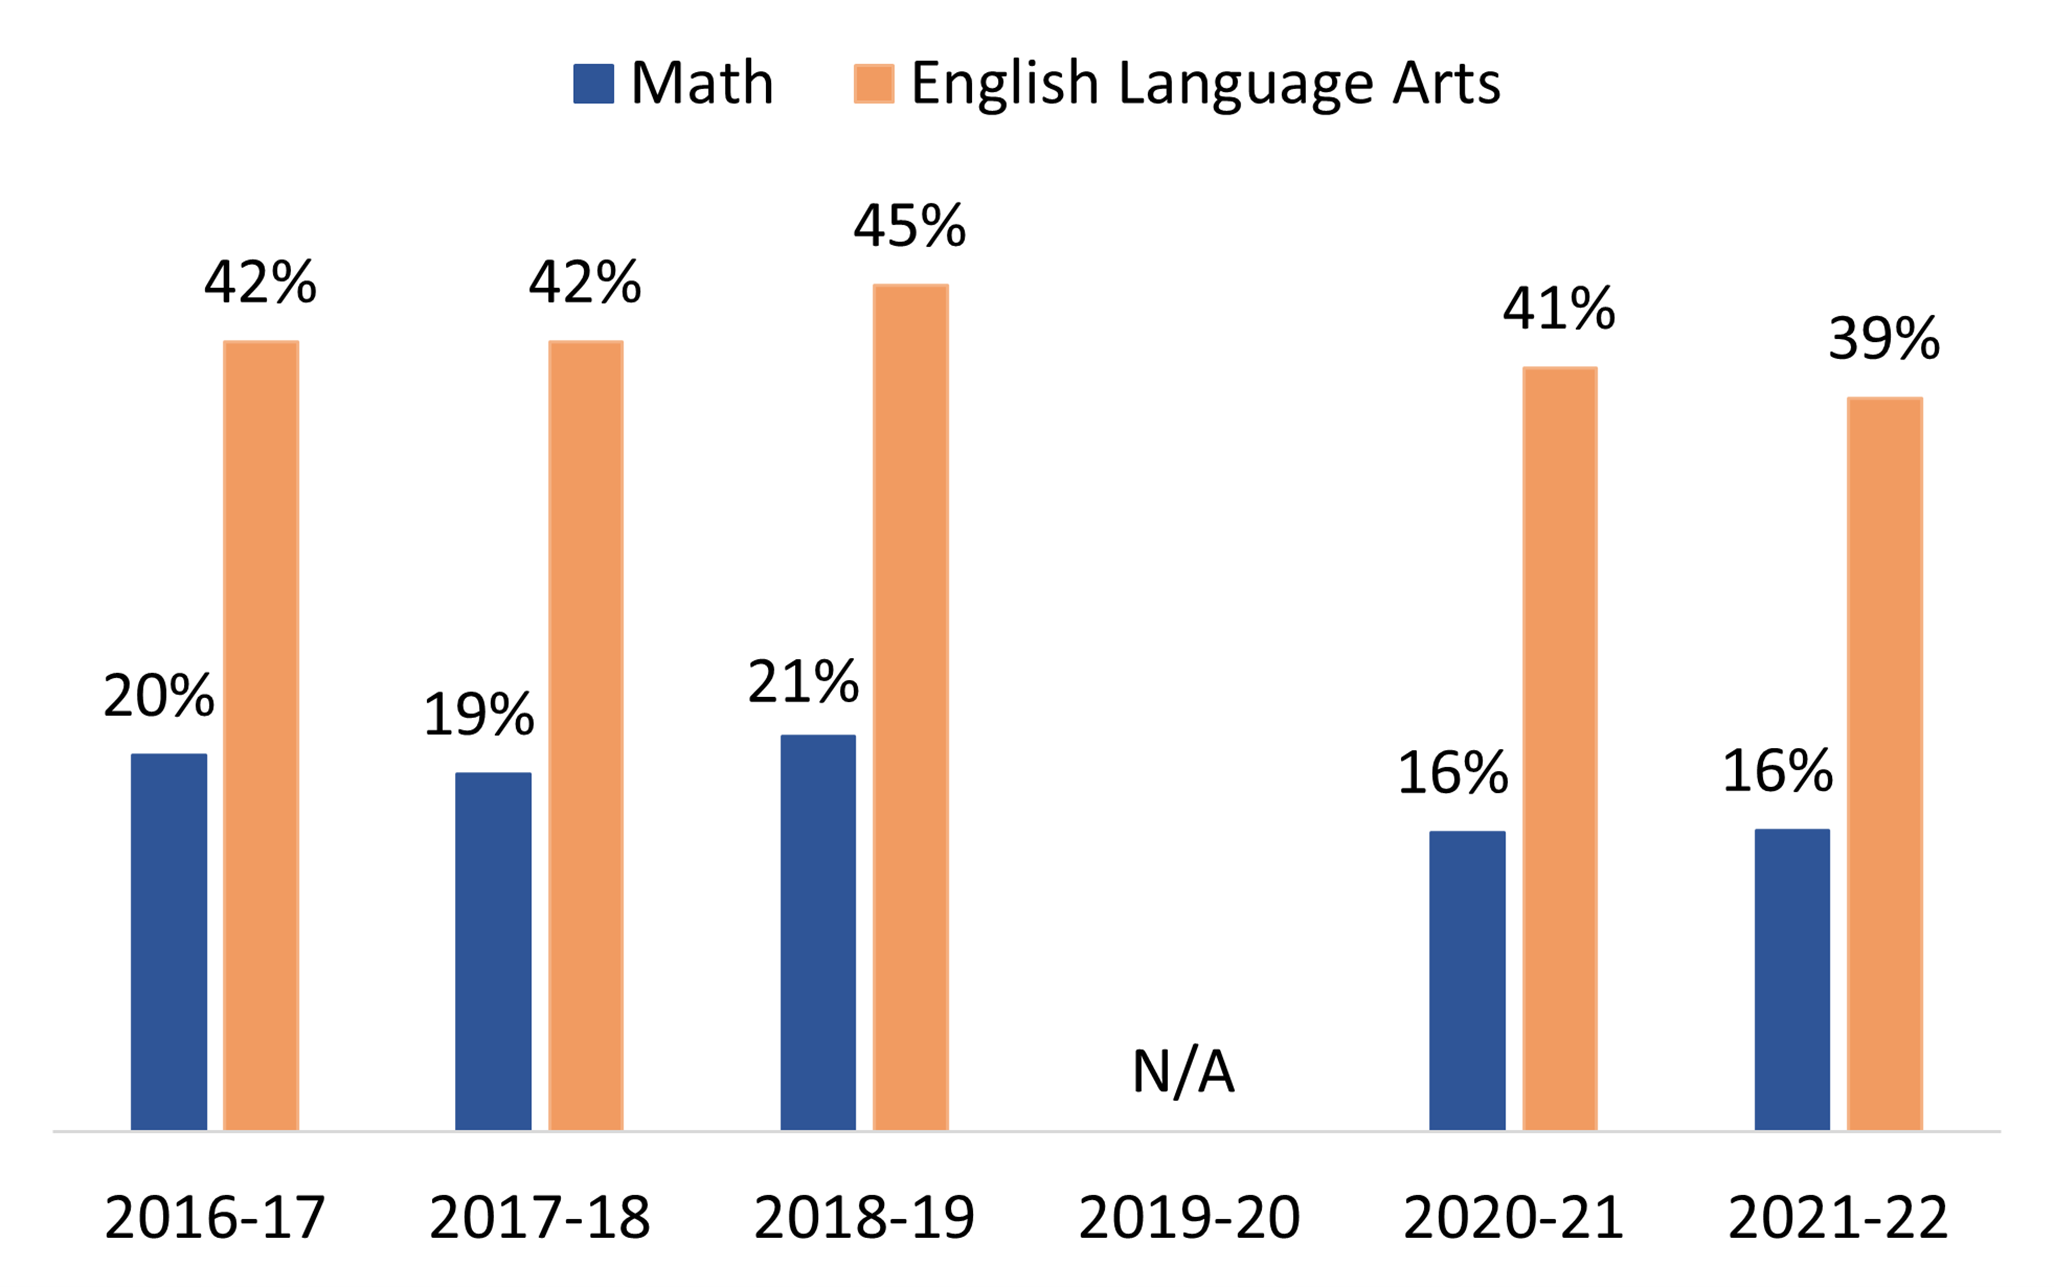 Six bar charts, each with values for the percentage of students who scored at or above proficiency on the CAASPP math and English language arts assessments between the 2016-17 and 2021-22 school years. The 2016-17 chart's percentages were 20% for math and 42% for English language arts. The 2017-18 chart's percentages were 19% for math and 42% for English language arts. The 2018-19 chart's percentages were 21% for math and 45% for English language arts. Percentages for 2019-20 are not at available due to the COVID-19 pandemic and no testing. The 2020-21 chart's percentages were 16% for math and 41% for English language arts, however, there was limited testing during the 2020-21 school year due to the COVID-19 pandemic. The 2021-22 chart's percentages were 16% for math and 39% for English language arts.